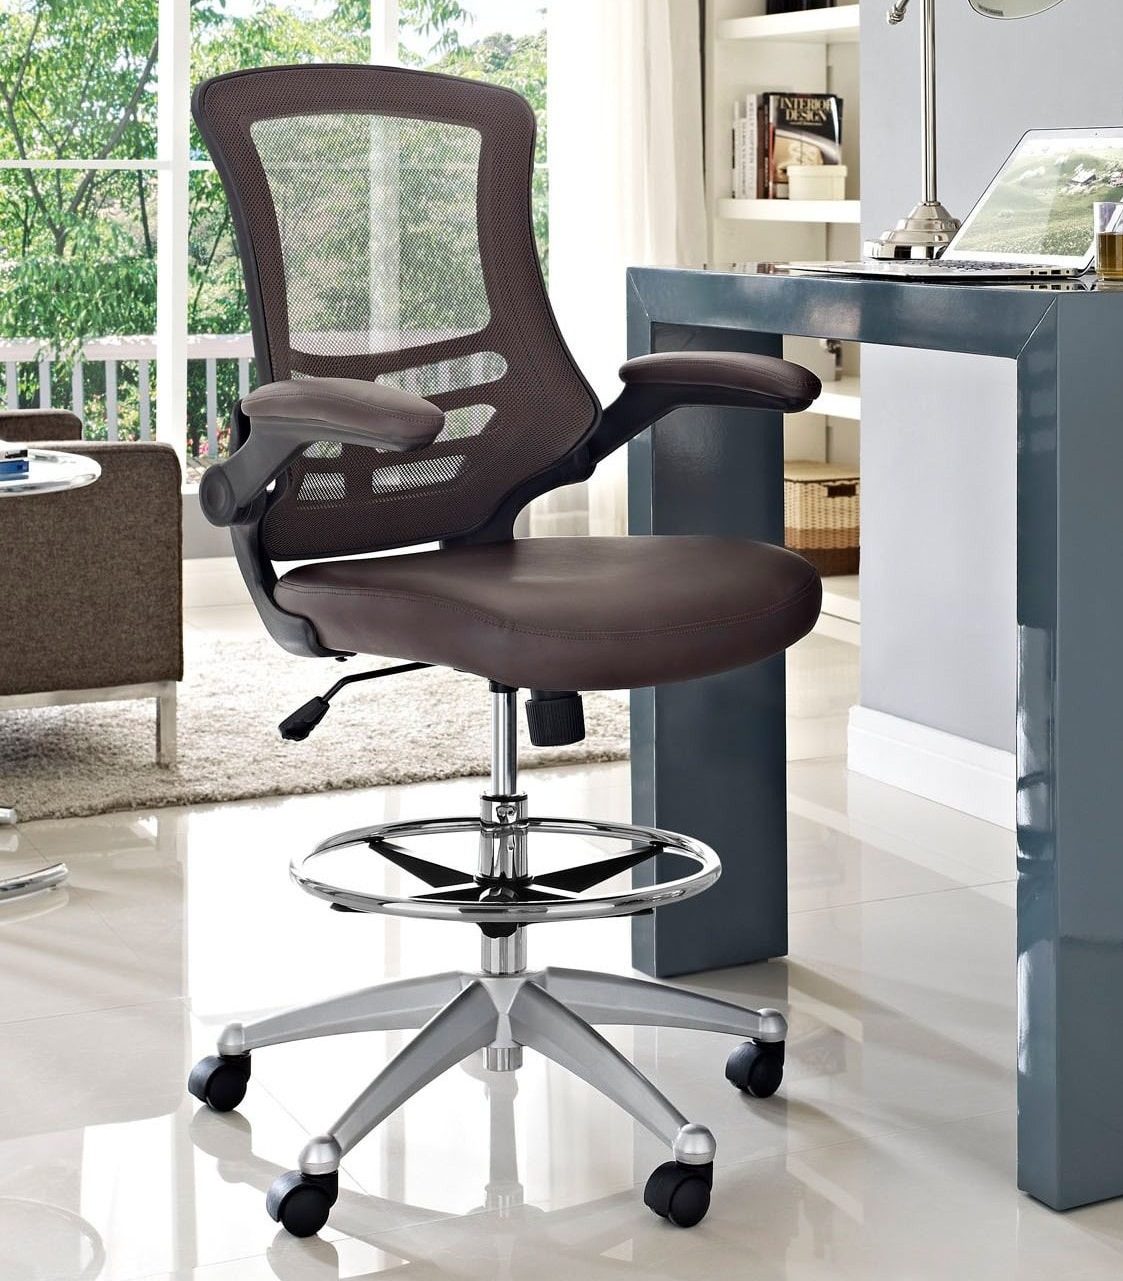 The 8 Best Drafting Chairs for Standing Desk: Top Rated Picks